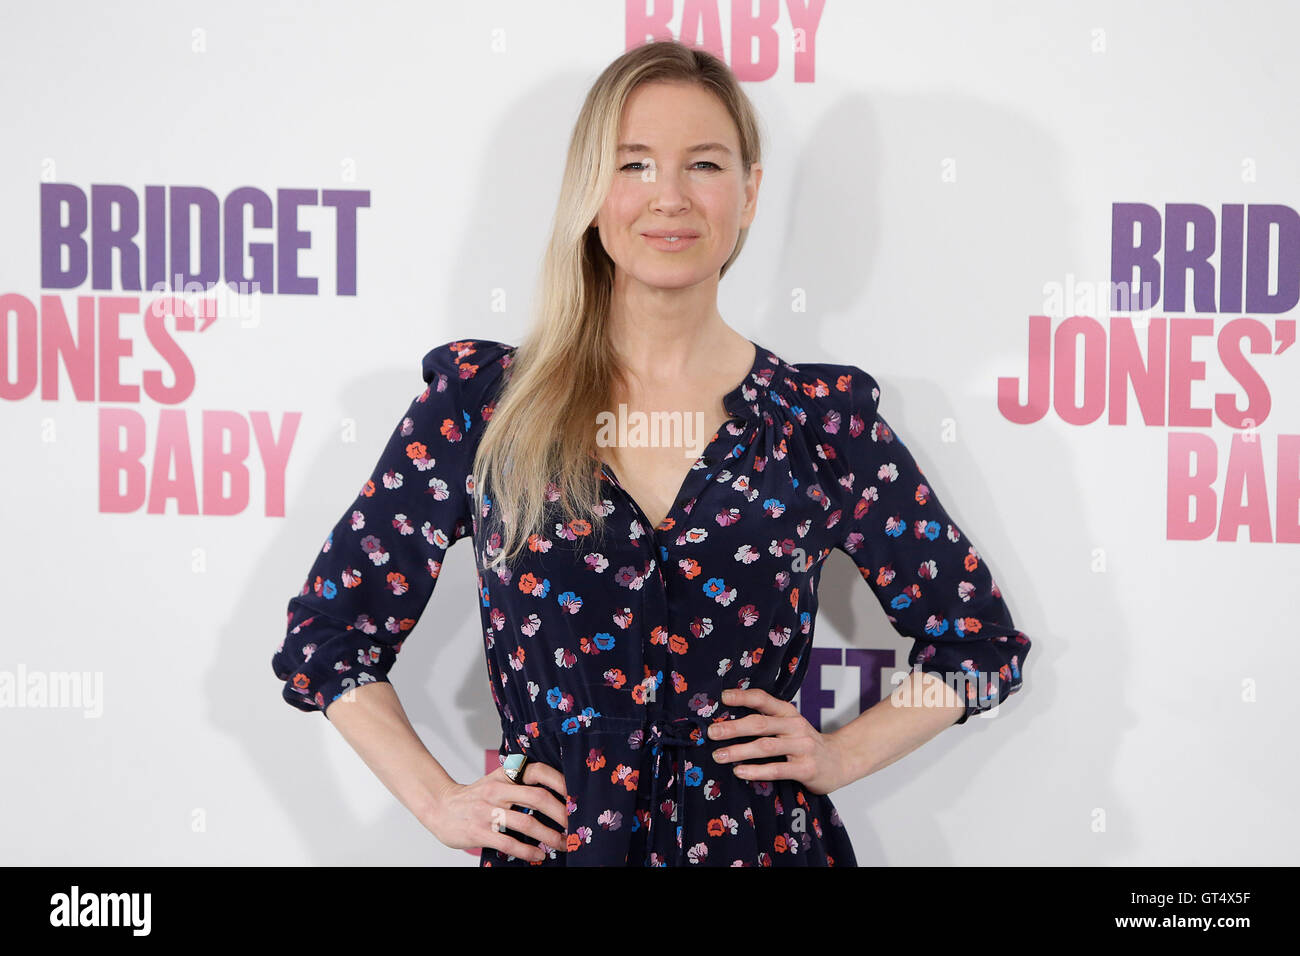 Madrid, Spain. 9th September, 2016. Actress Renee Zellweger during a photocall of 'Bridget Jones's Baby'  in Madrid, Spain on Friday September 9, 2016 Credit:  Gtres Información más Comuniación on line,S.L./Alamy Live News Stock Photo